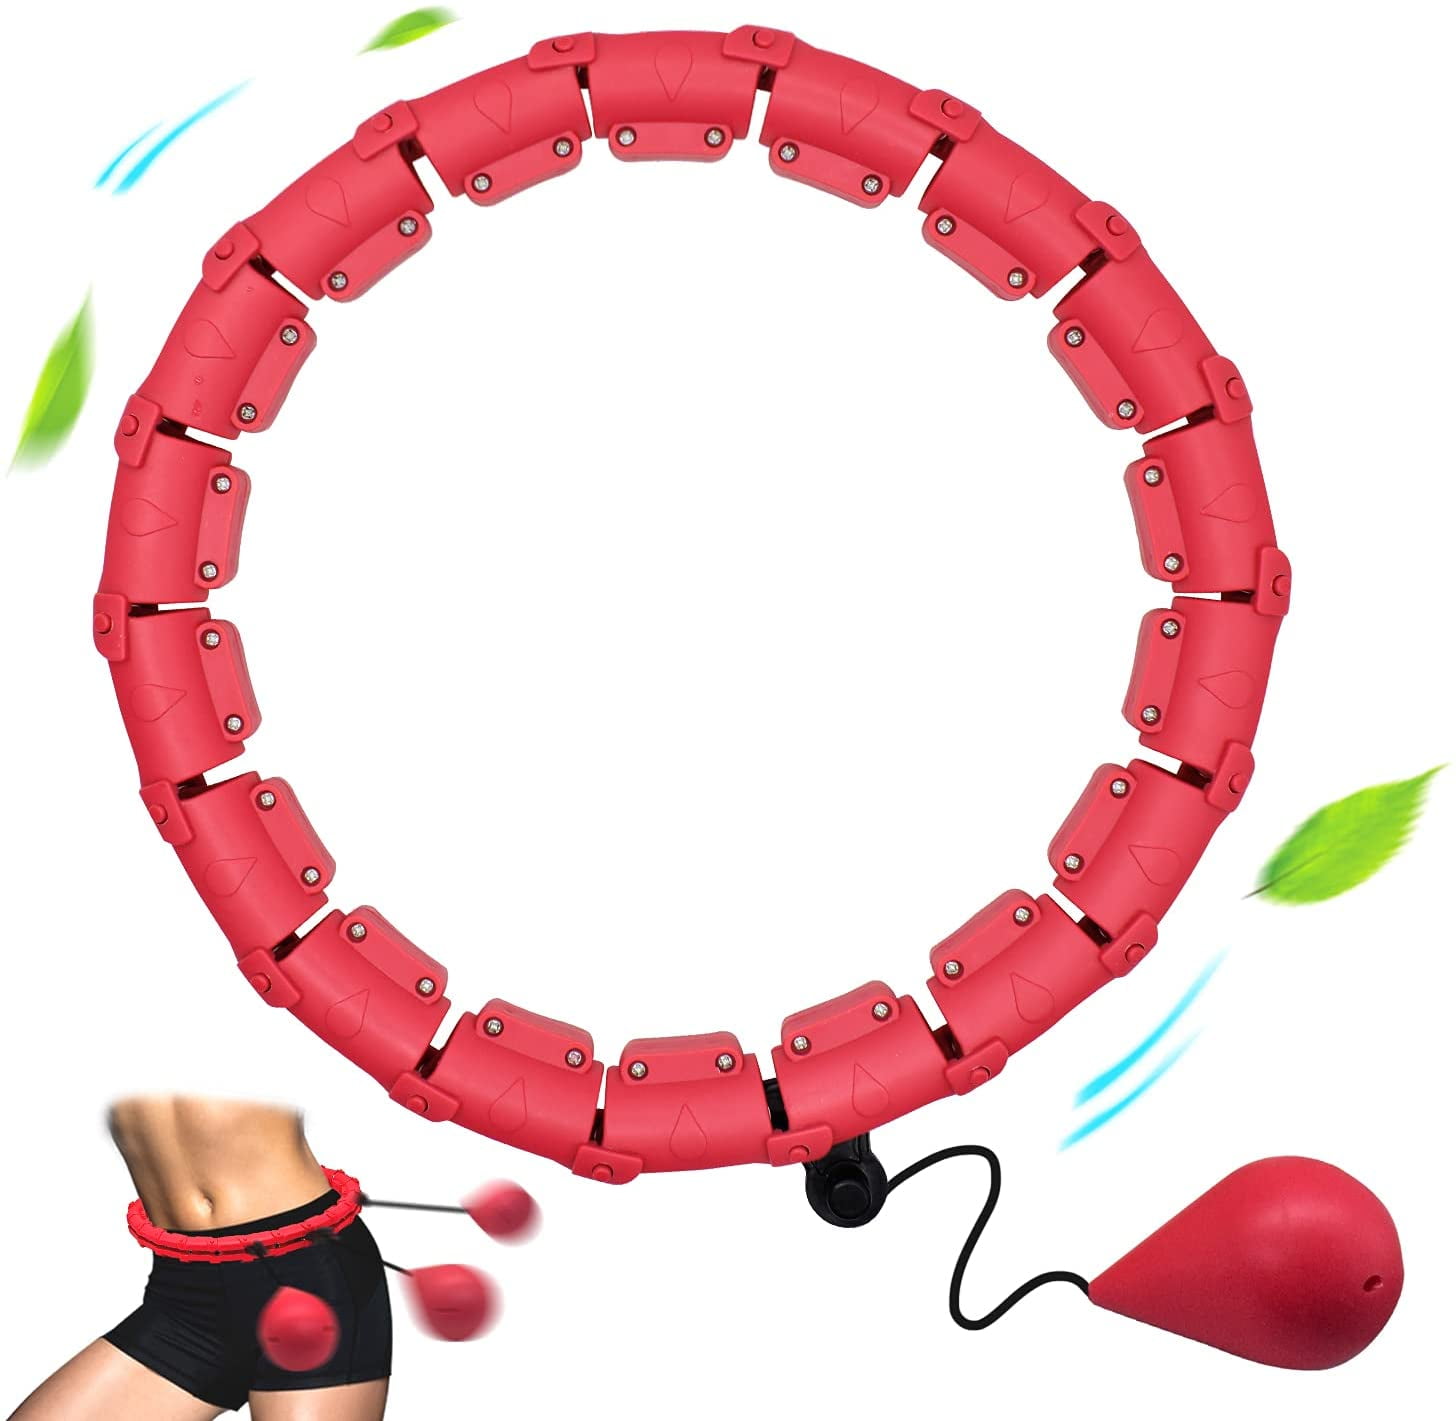 Weighted Smart Hoola Hoop for Adults Kids Weight Loss Massage Non-Falling Hoola Hoop Fitness Hula Hoop for Exercise 16 Detachable Knots Adjustable Weight Auto-Spinning Ball 